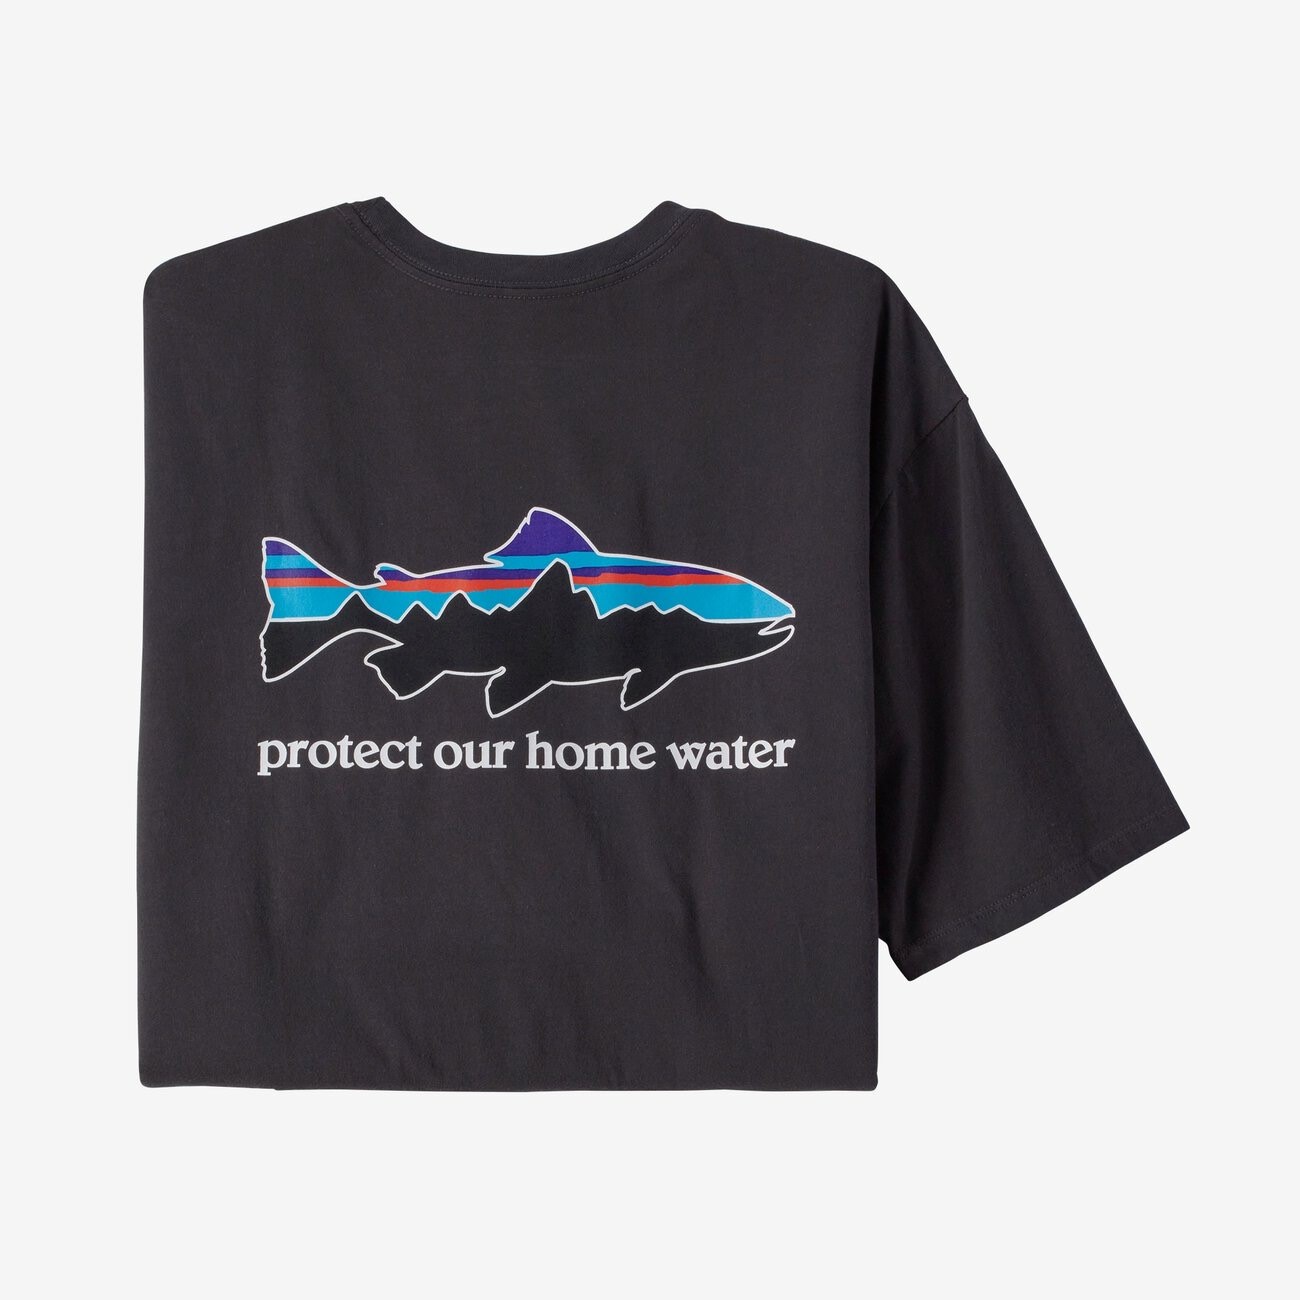 Patagonia M's Home Water Trout Organic T-Shirt - Ink Black - Large